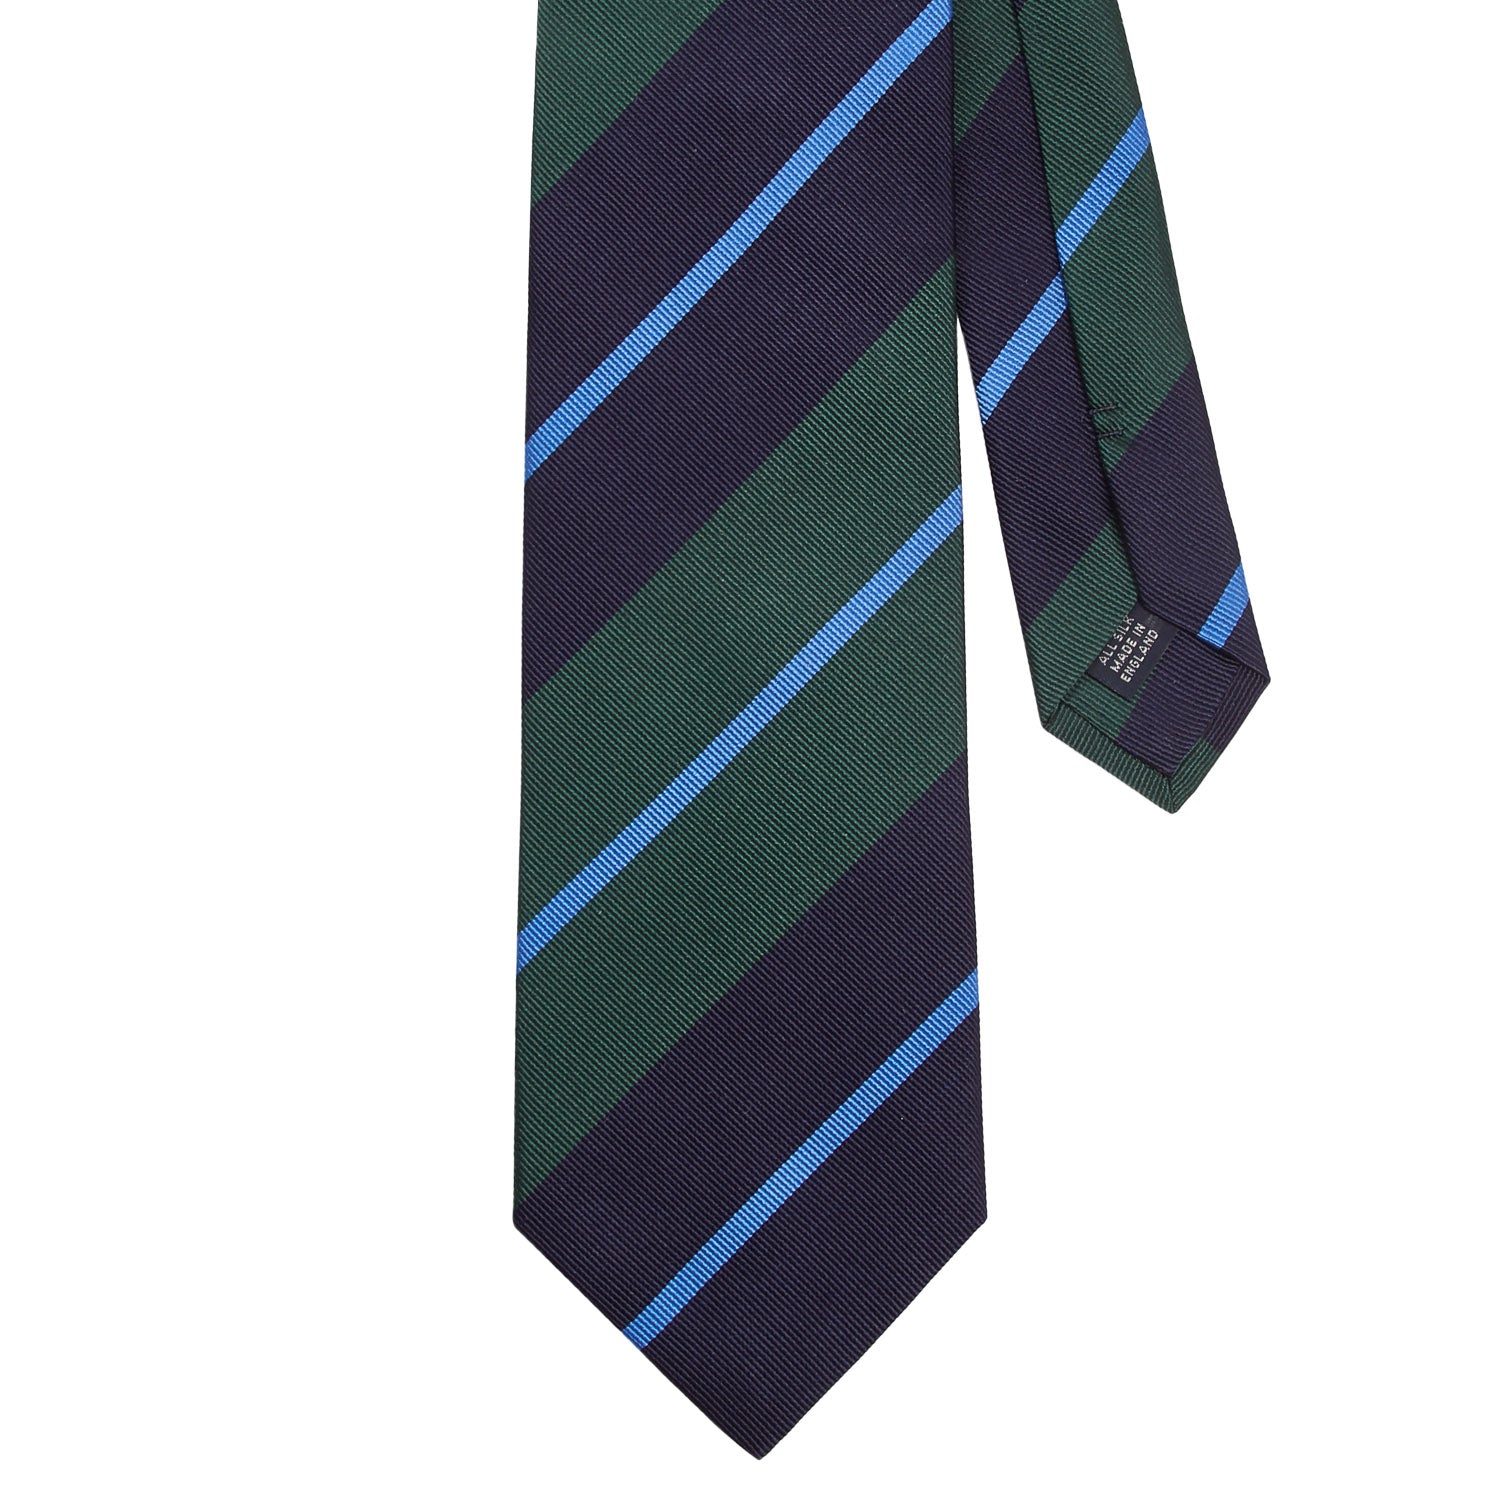 A Sovereign Grade Navy/Green Rep Tie from KirbyAllison.com, handmade in the United Kingdom.